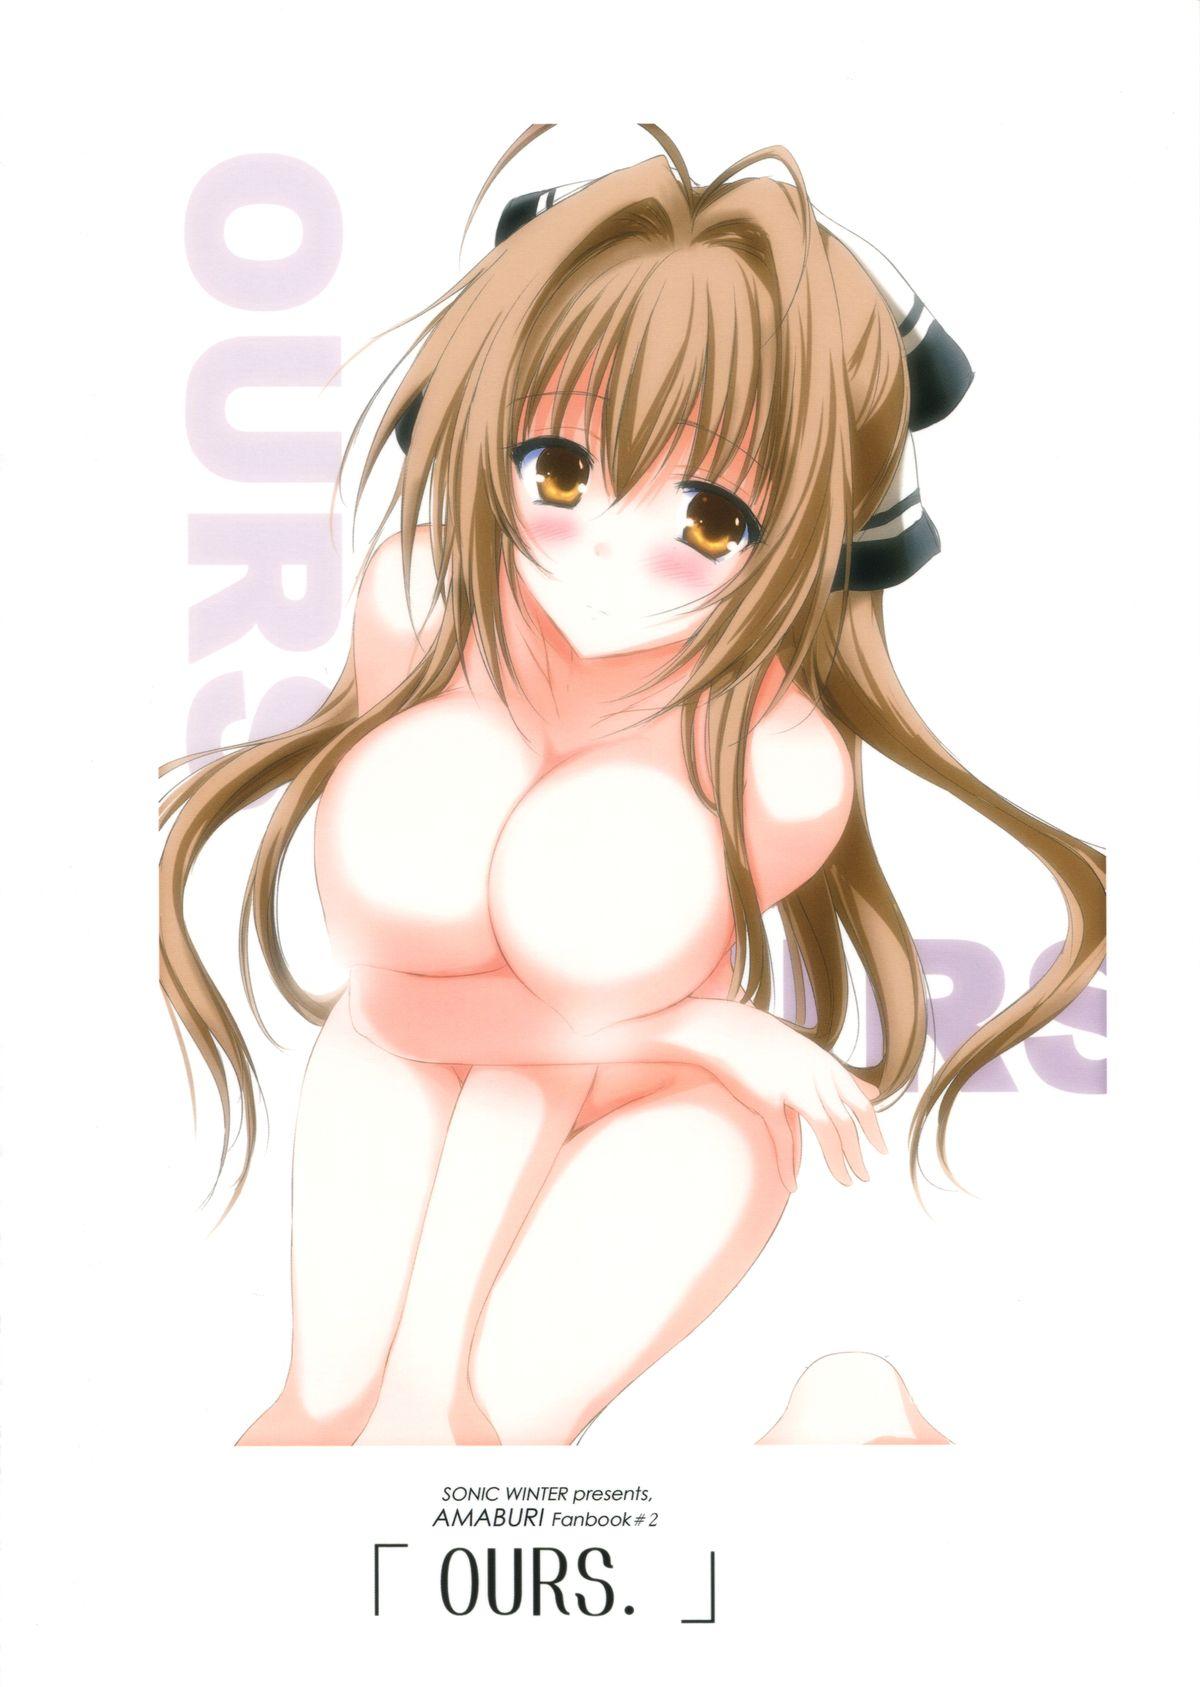 Stunning OURS. - Amagi brilliant park Hairypussy - Page 2